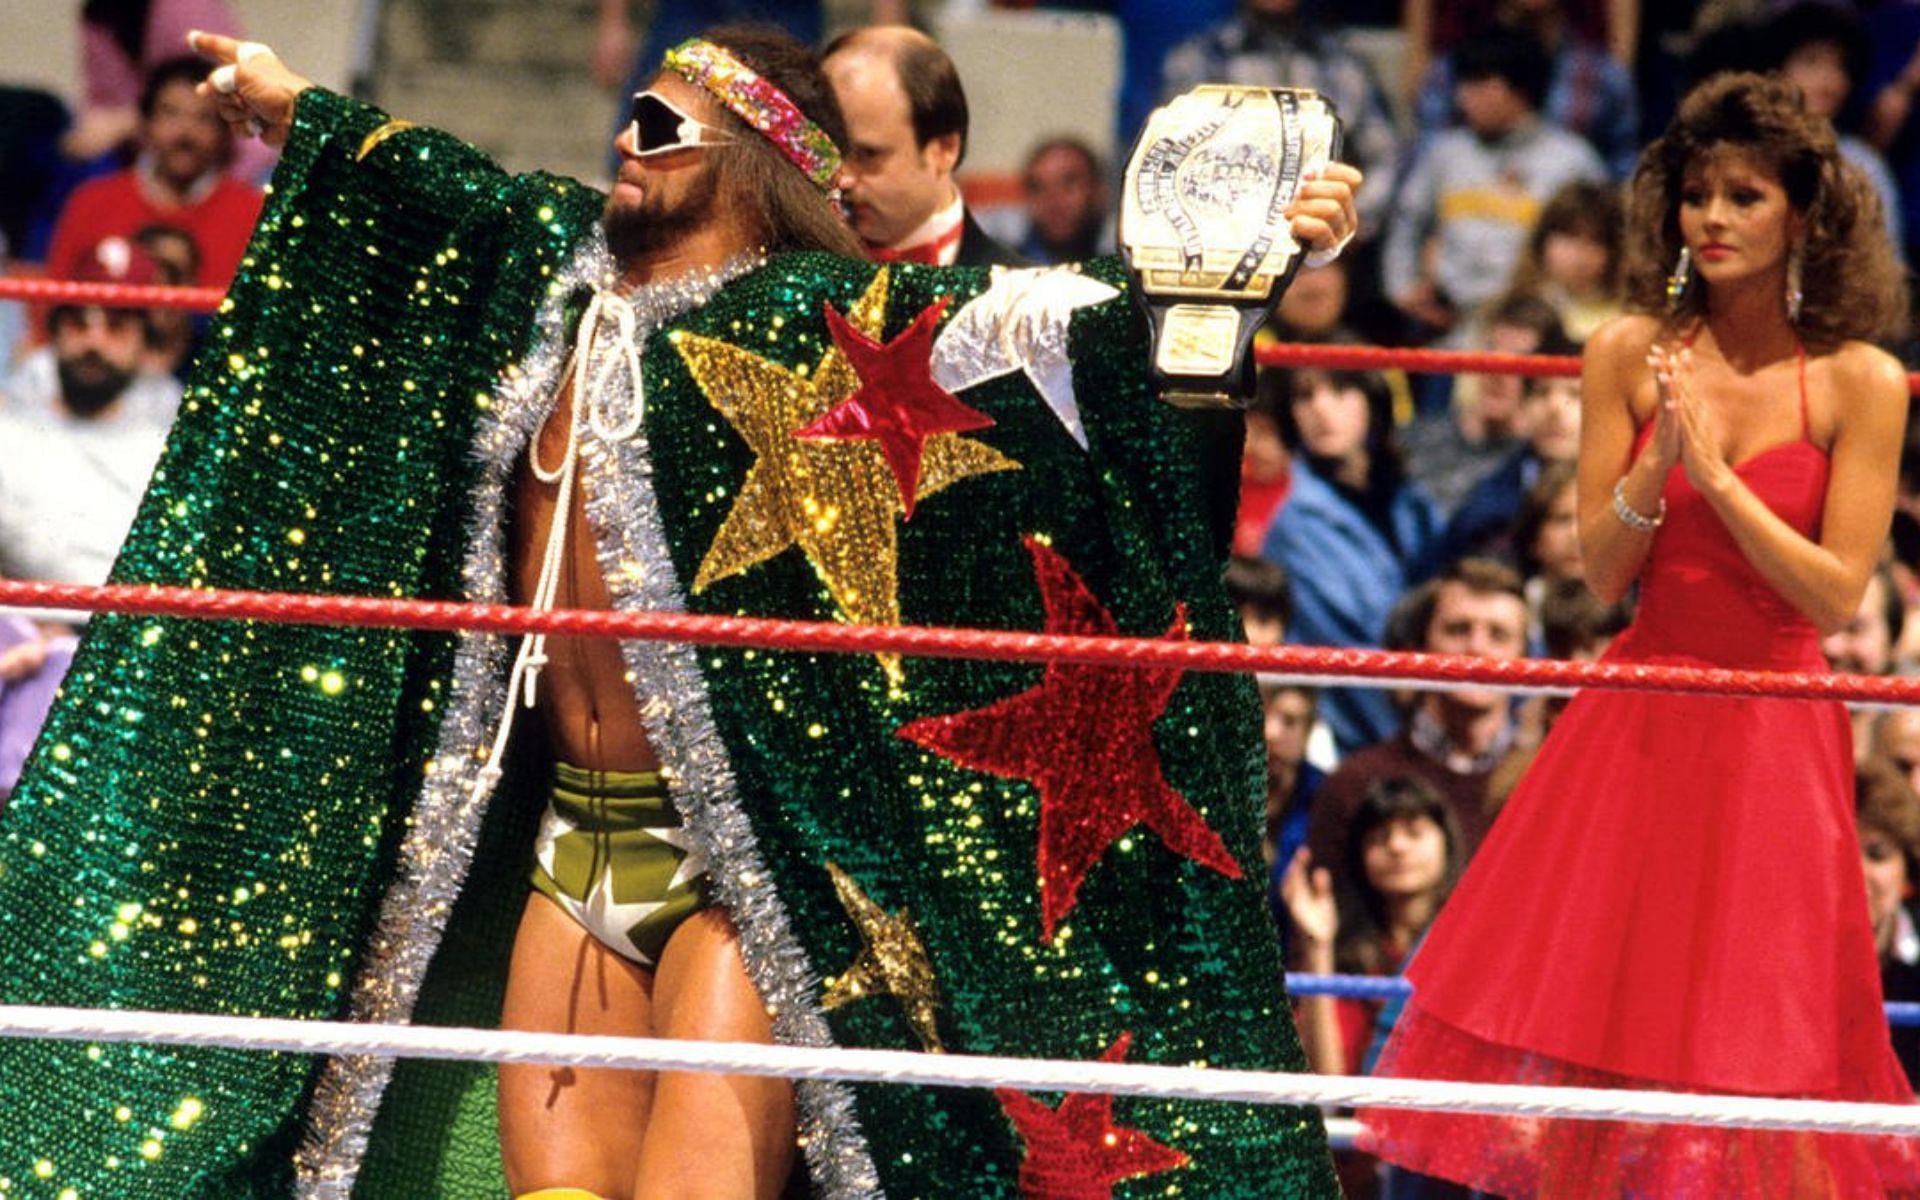 Macho Man Randy Savage and the lovely Miss Elizabeth.